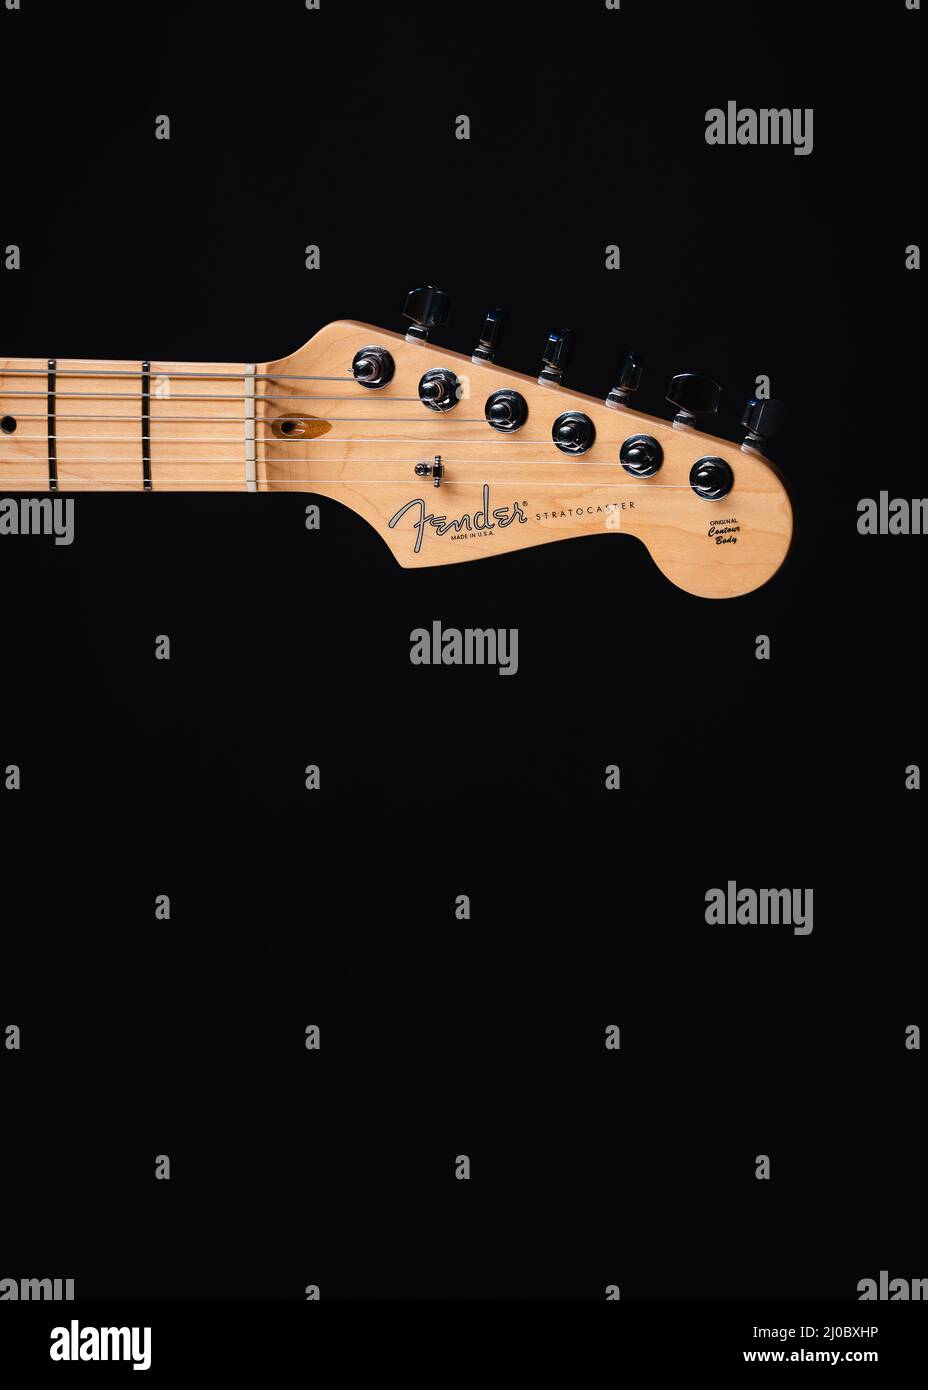 Candy Apple red stratocaster on black Stock Photo